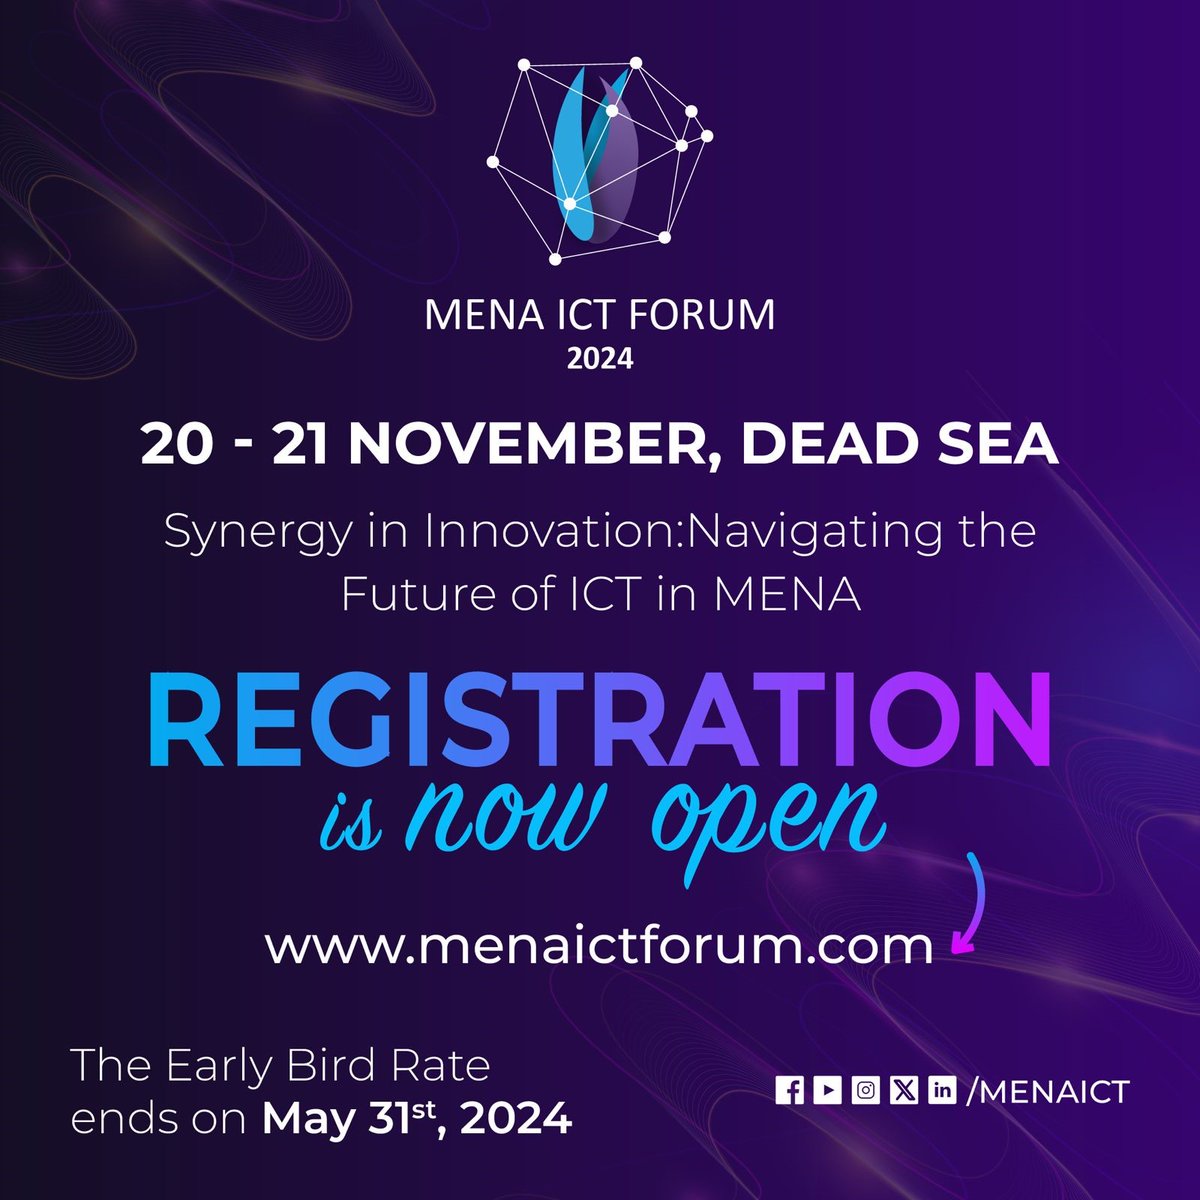 Join us at #MENAICTForum2024, where #Technology and #Innovation converge to shape the future of #ICT in the MENA region Register now to be part of this transformative event at menaictforum.com #MENAICTFORUM24 #future_of_ICT #AI #VR #CYBERSECURITY #IoT #WomeninTech